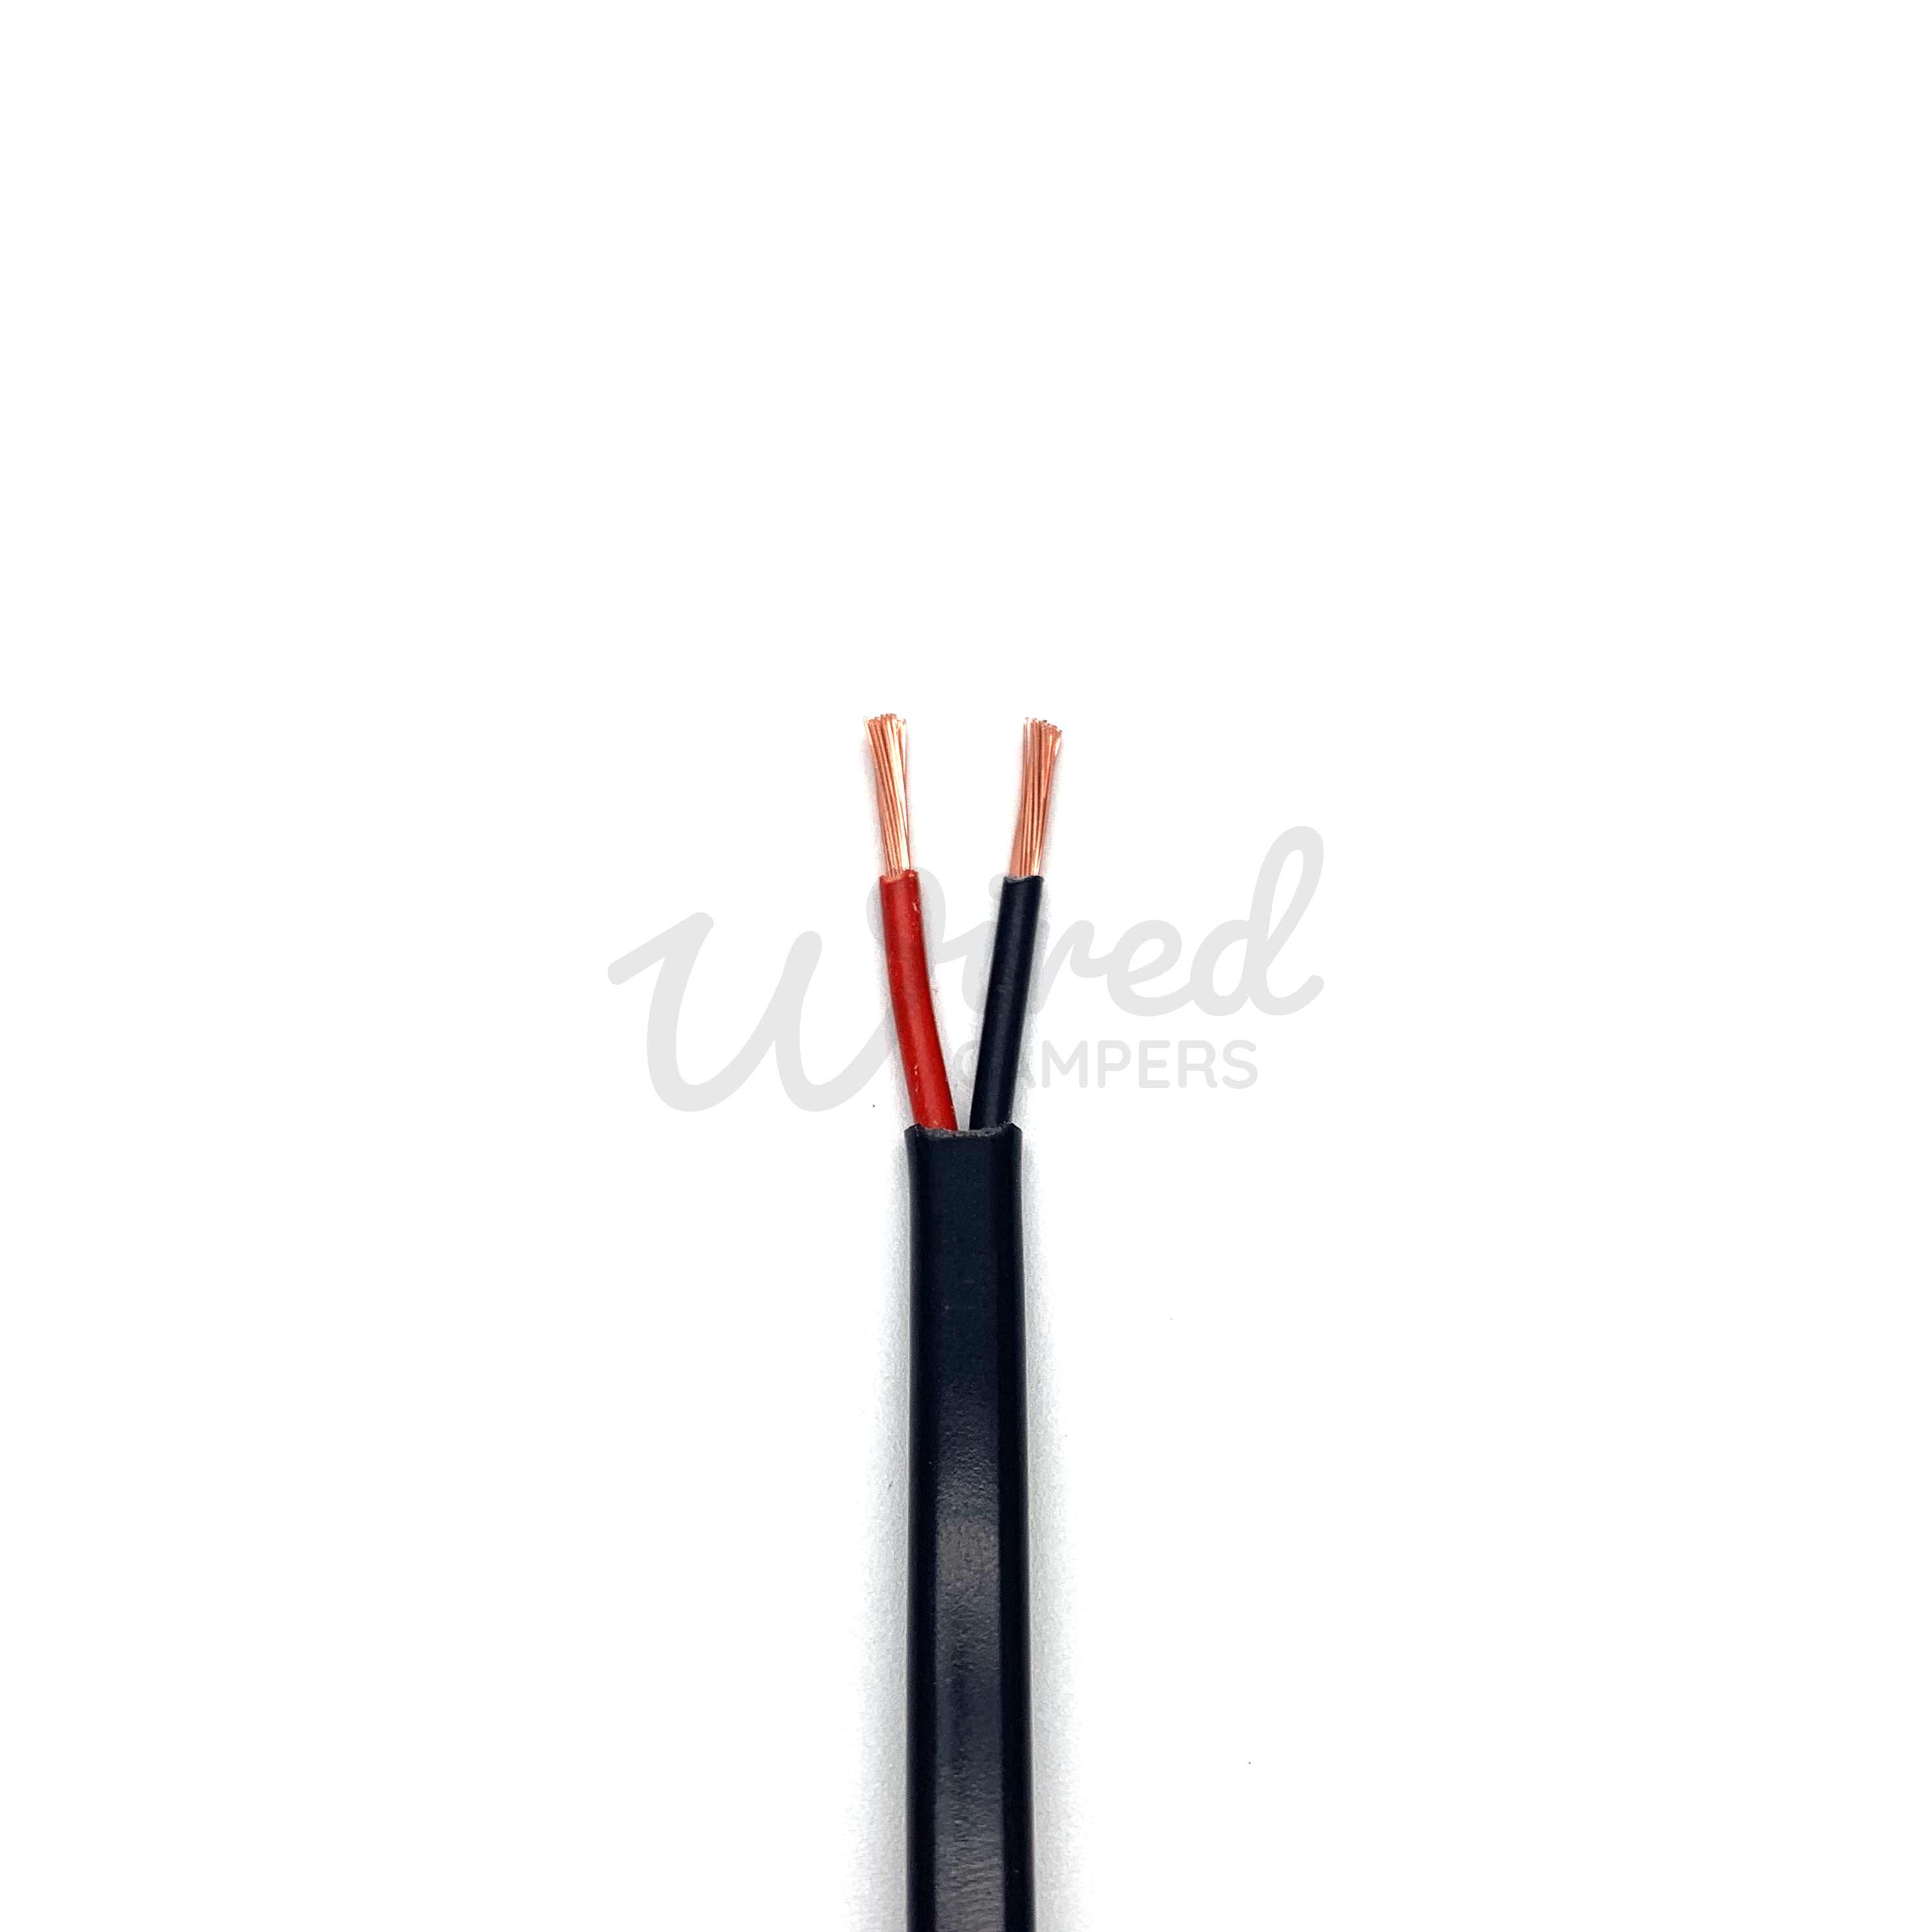 Wired Campers Limited 2.5mm2 29A Thin Wall Twin Core Flat Automotive Cable